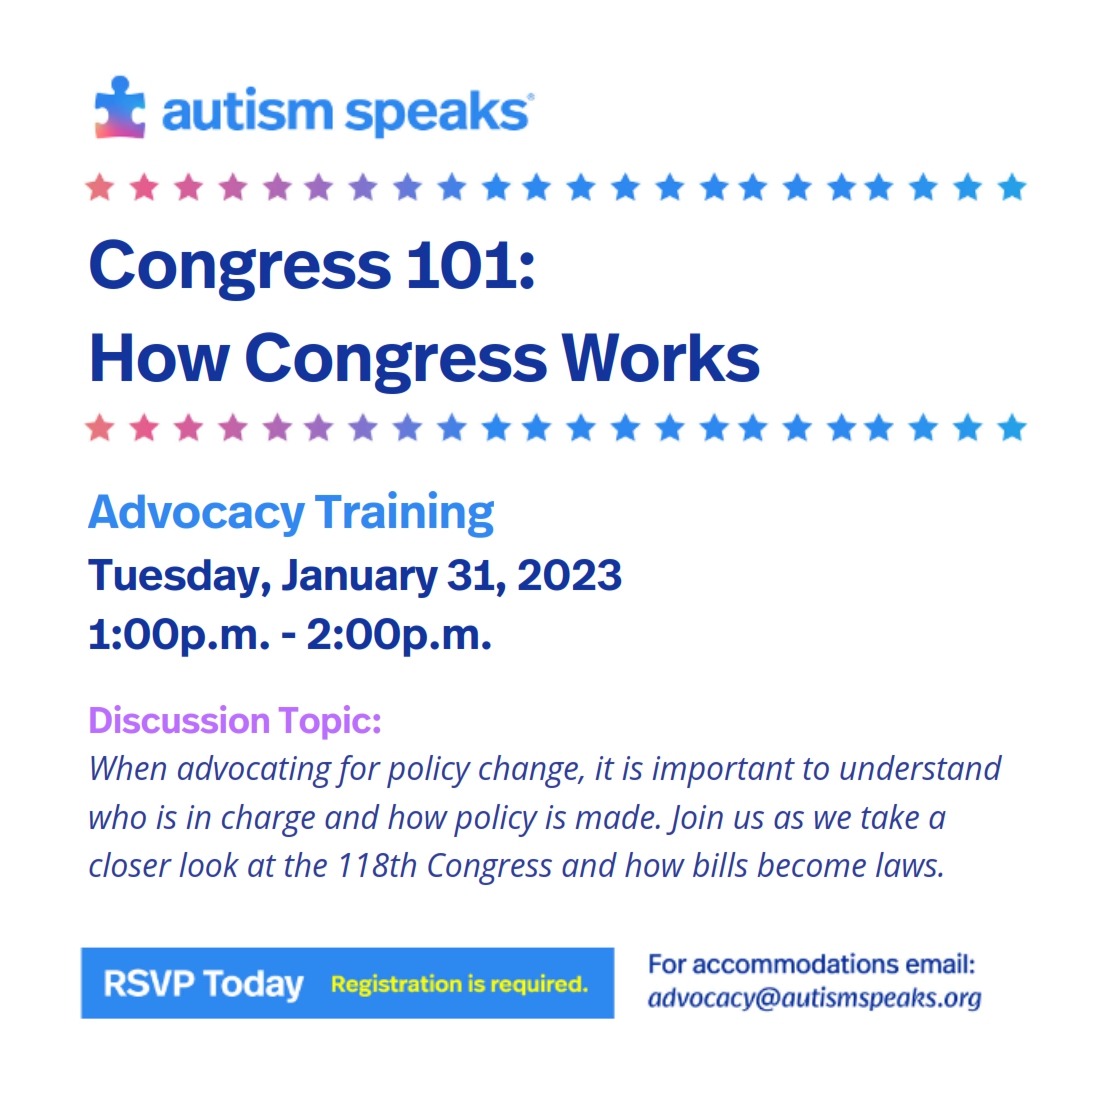 Join us TOMORROW for an advocacy training on the structure, operations, and leadership of Congress. Register at autismspeaks.zoom.us/meeting/regist…